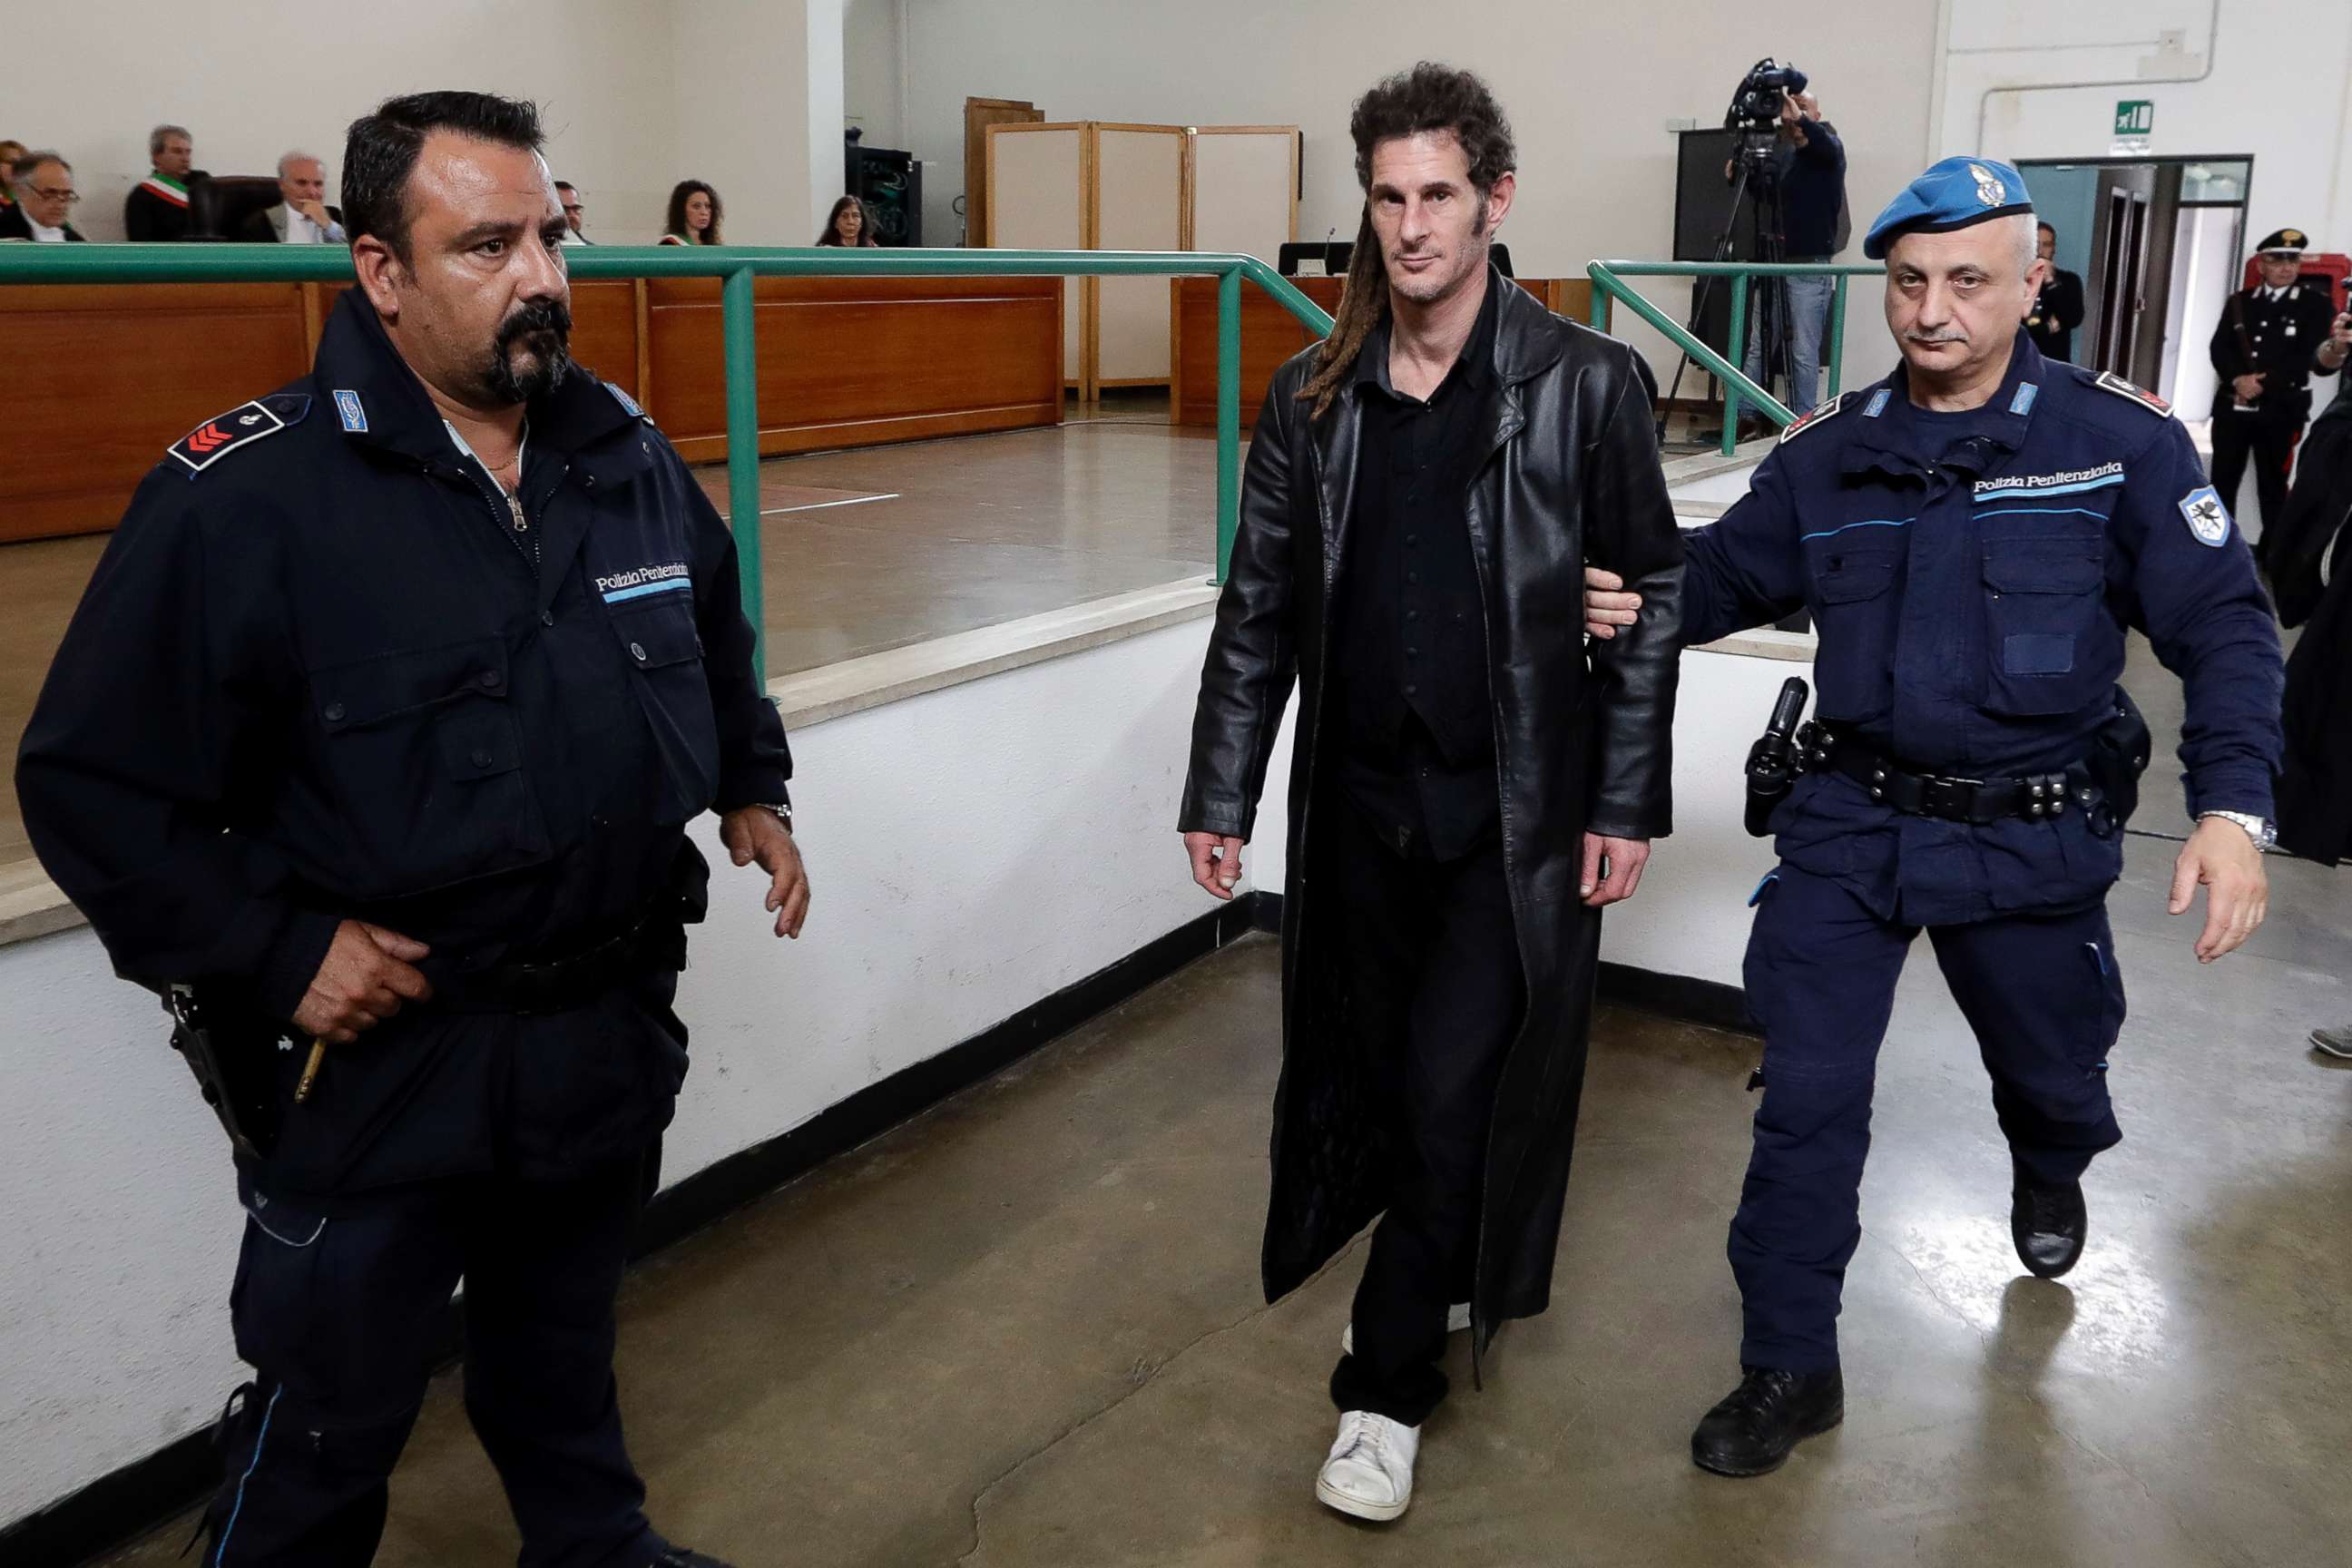 PHOTO: Defendant Massimo Galioto, accused of manslaughter in the drowning death of Beau Solomon, arrives in court during the first hearing of the trial, in Rome, Tuesday, May 8, 2018.